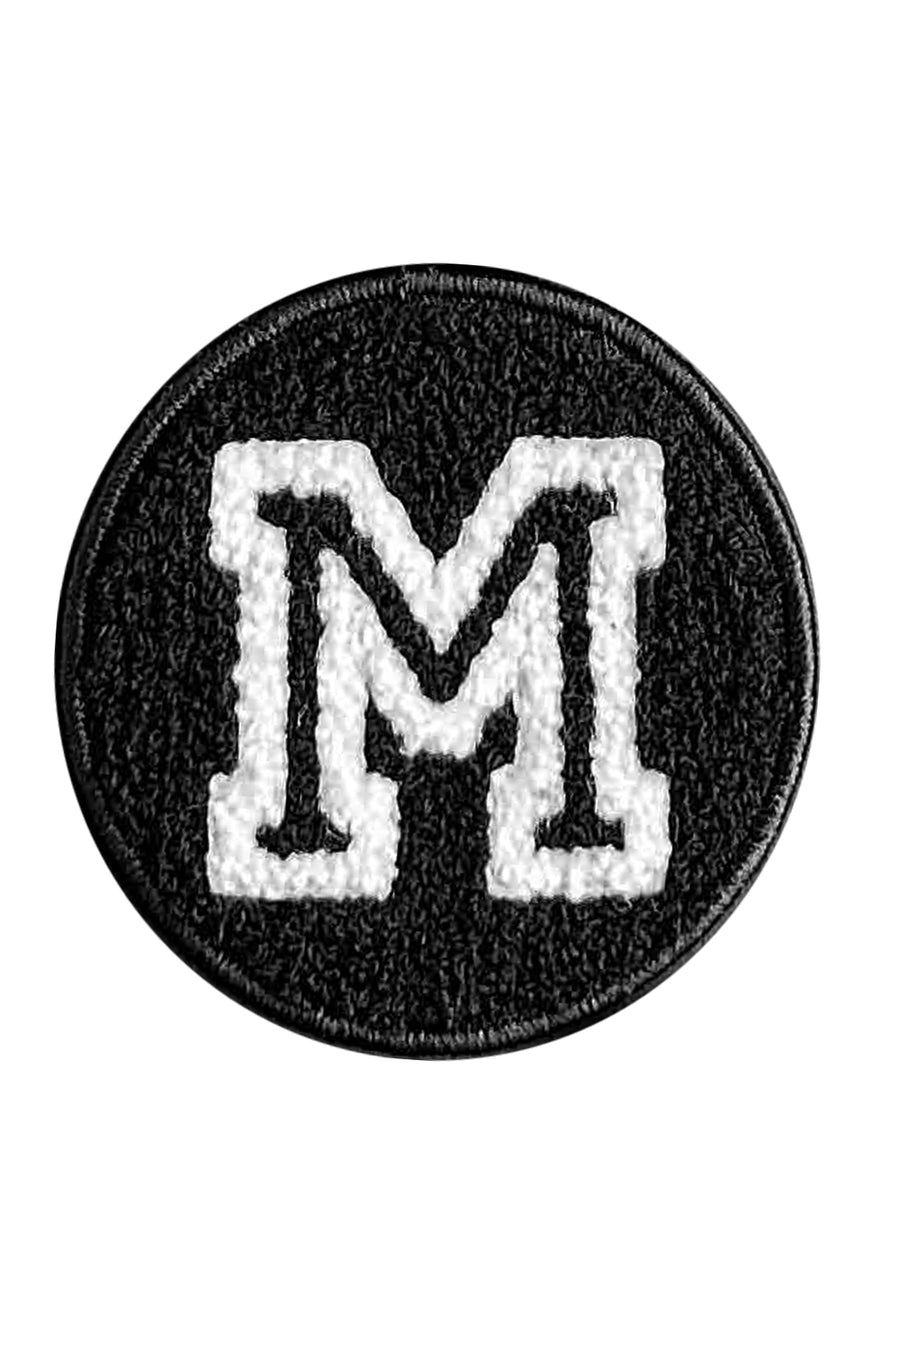 Velcro Initial Letter M Patch